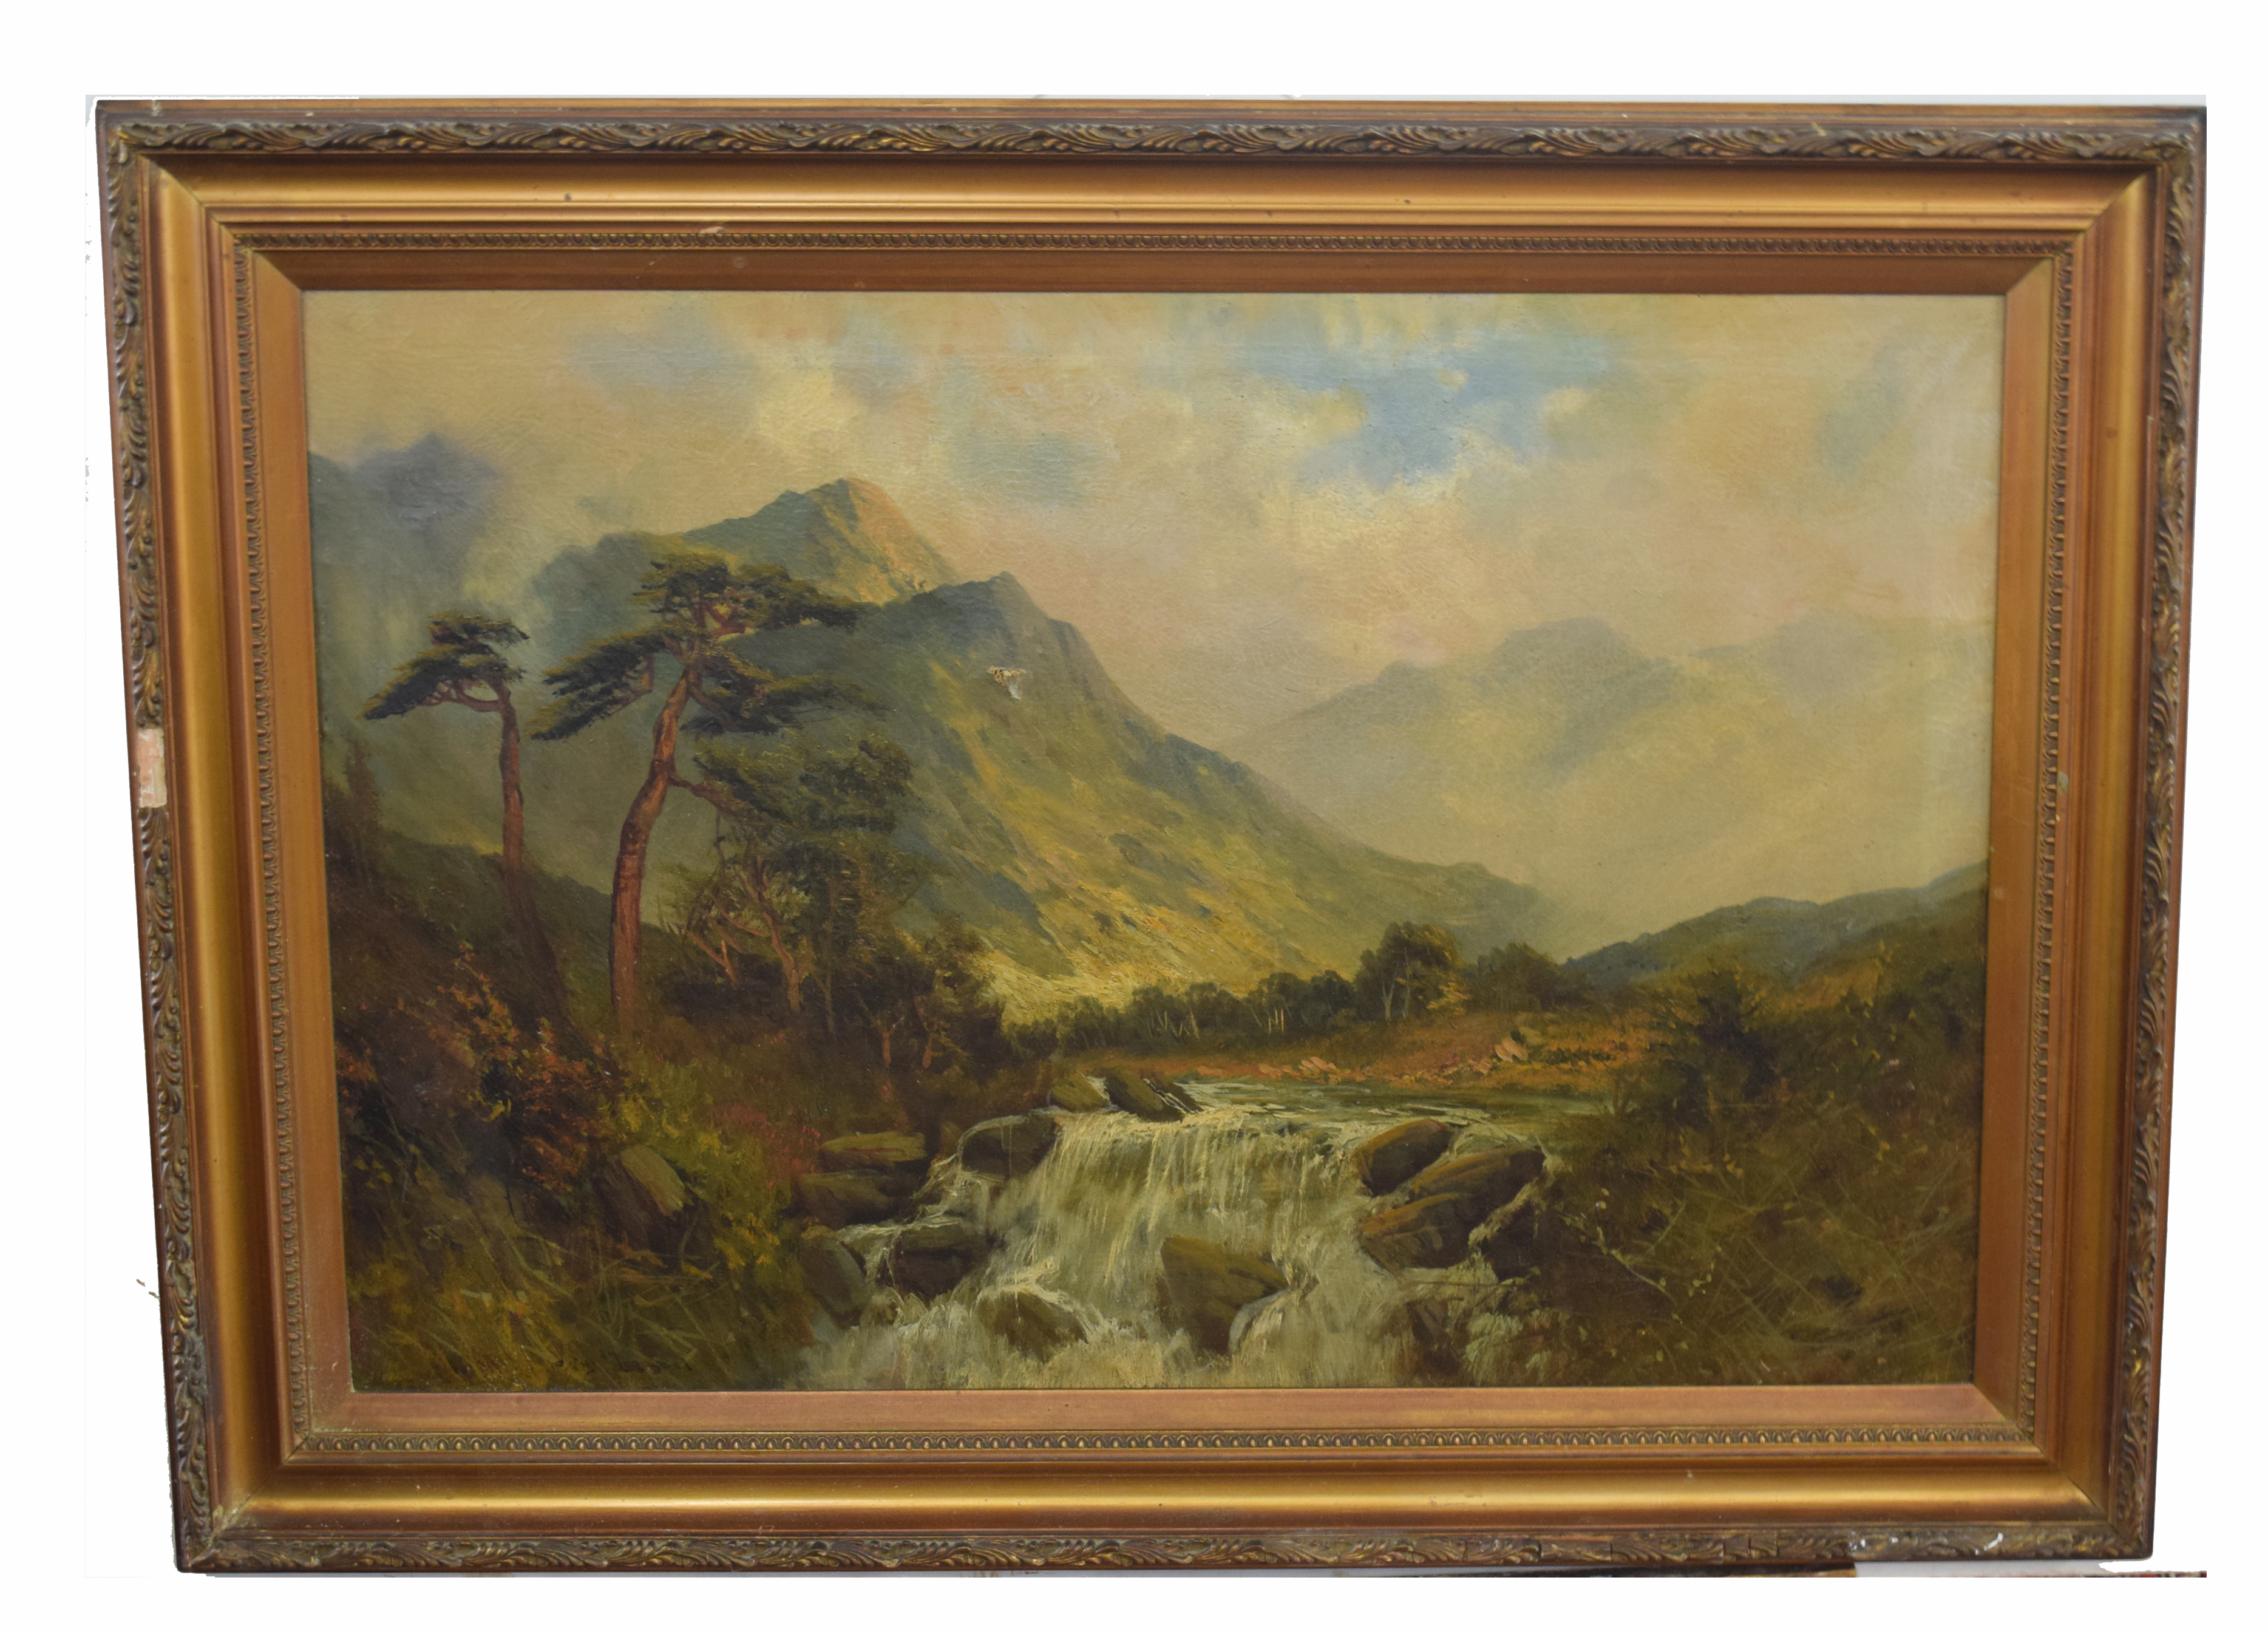 British, 20th century, Pair of Landscapes showing a castle overlooking a lake and mountain in - Image 2 of 2